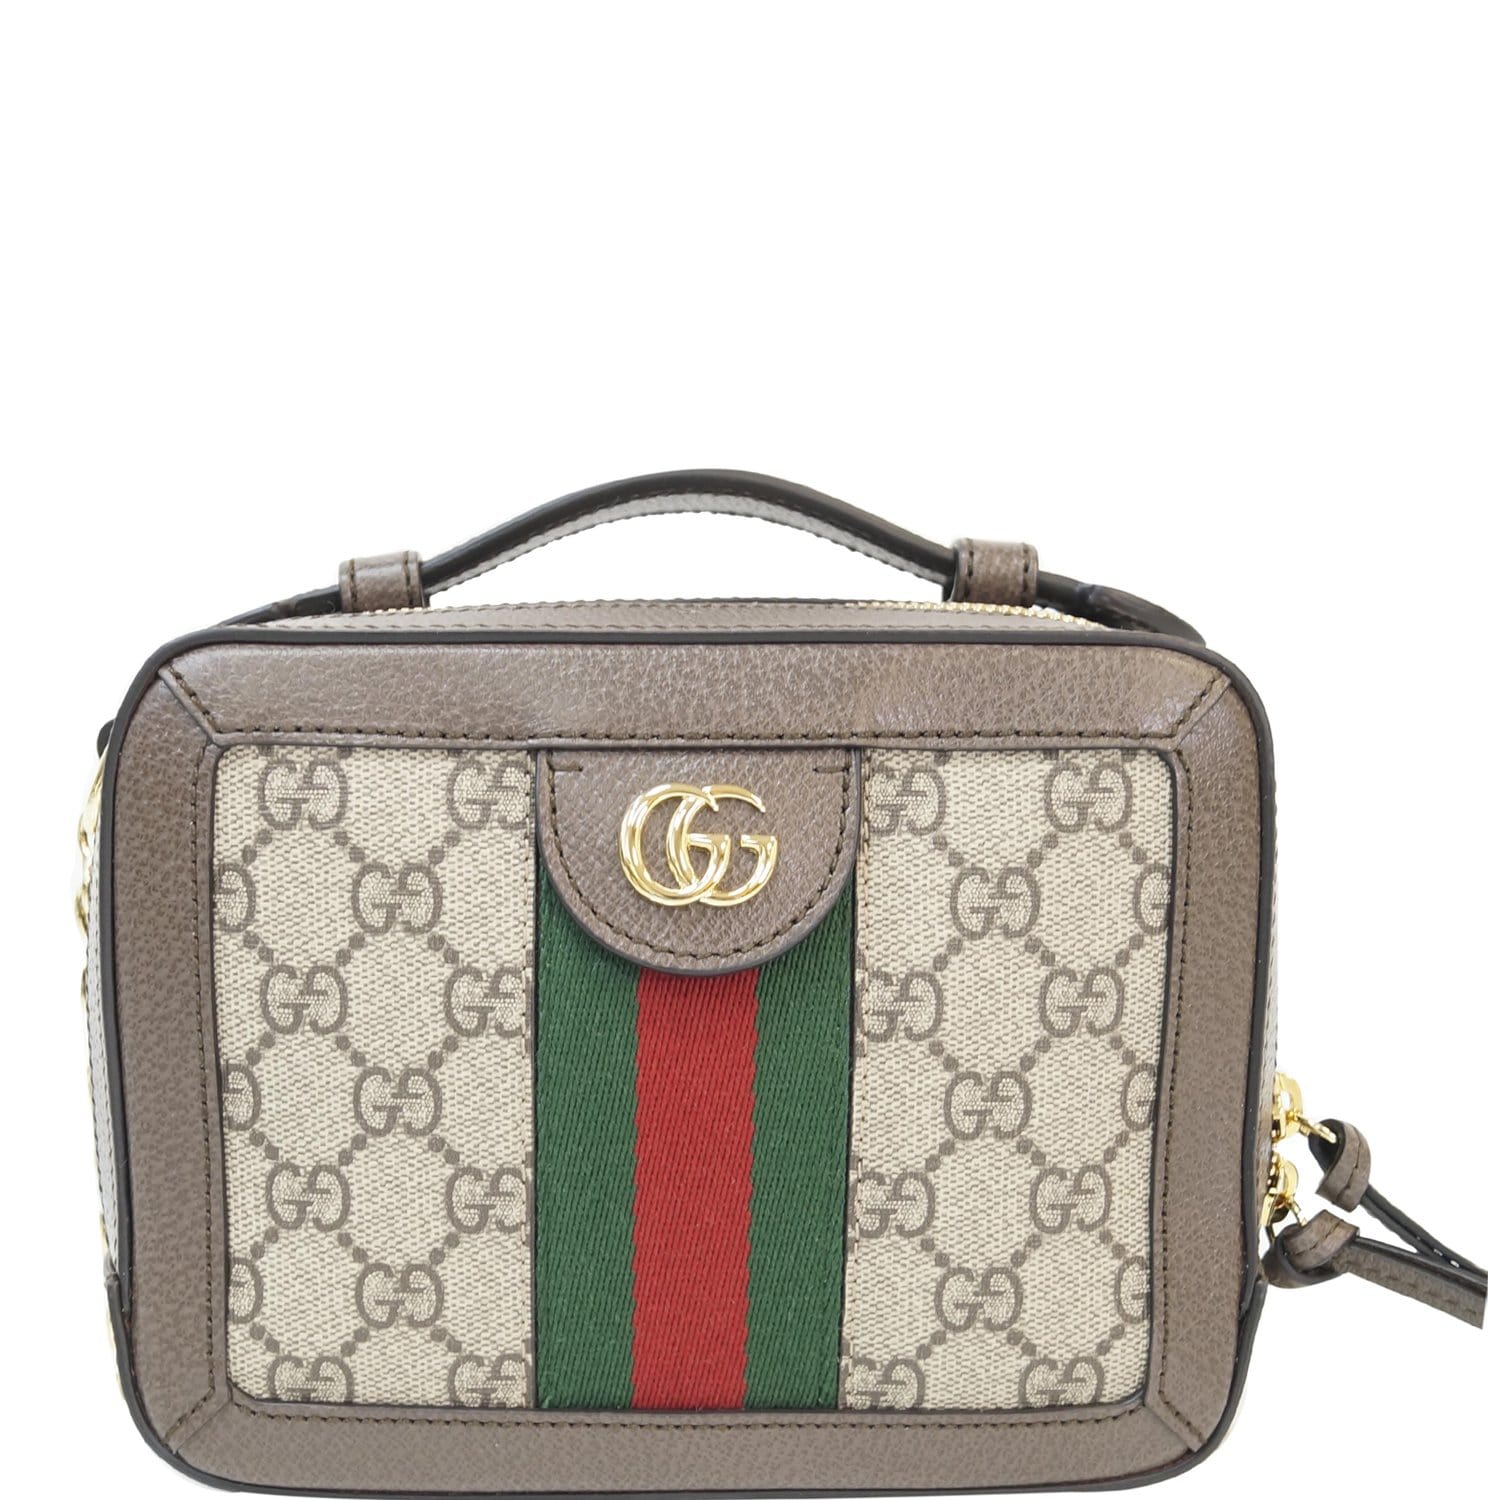 Gucci Small Ophidia GG Beige Shoulder Bag New